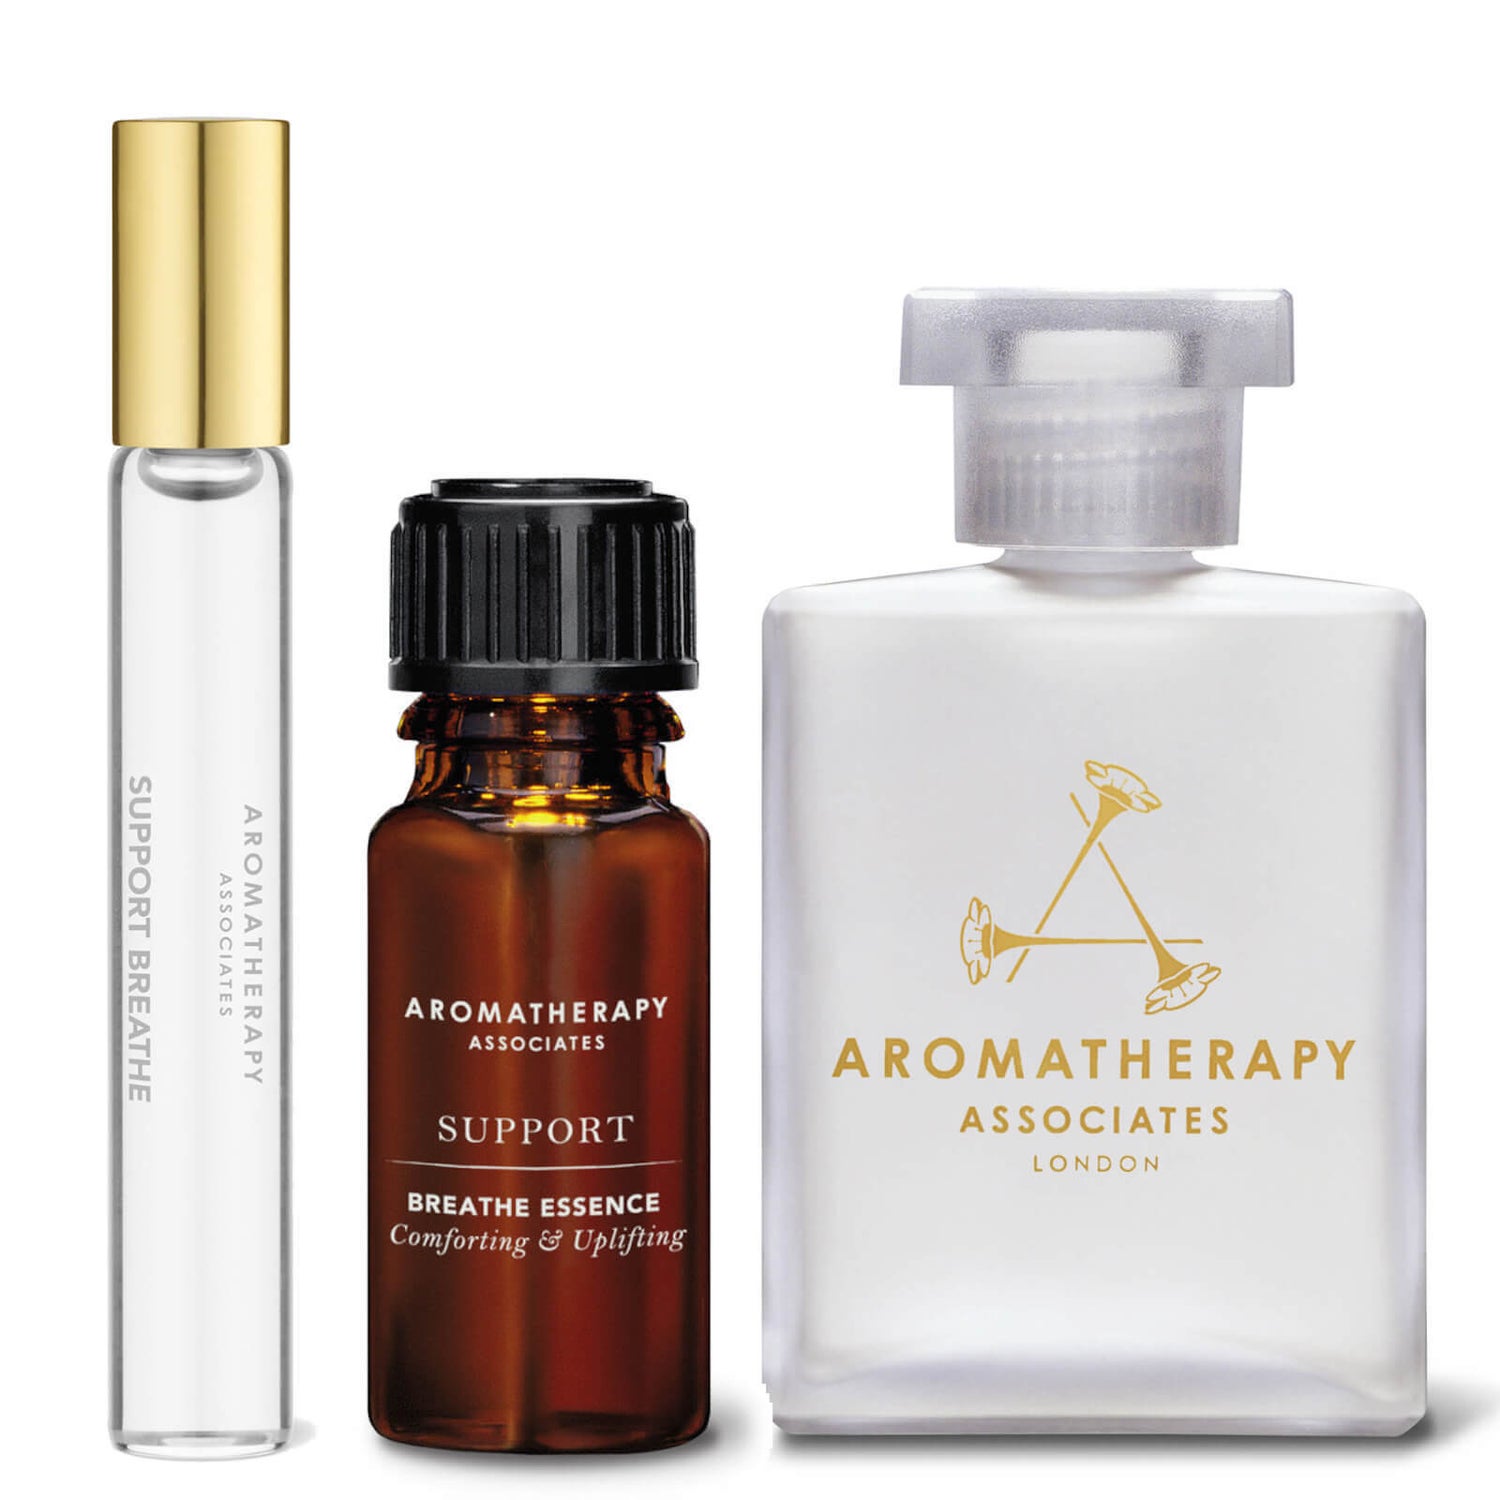 Aromatherapy Associates Self-Care Collection (Worth £87.00)